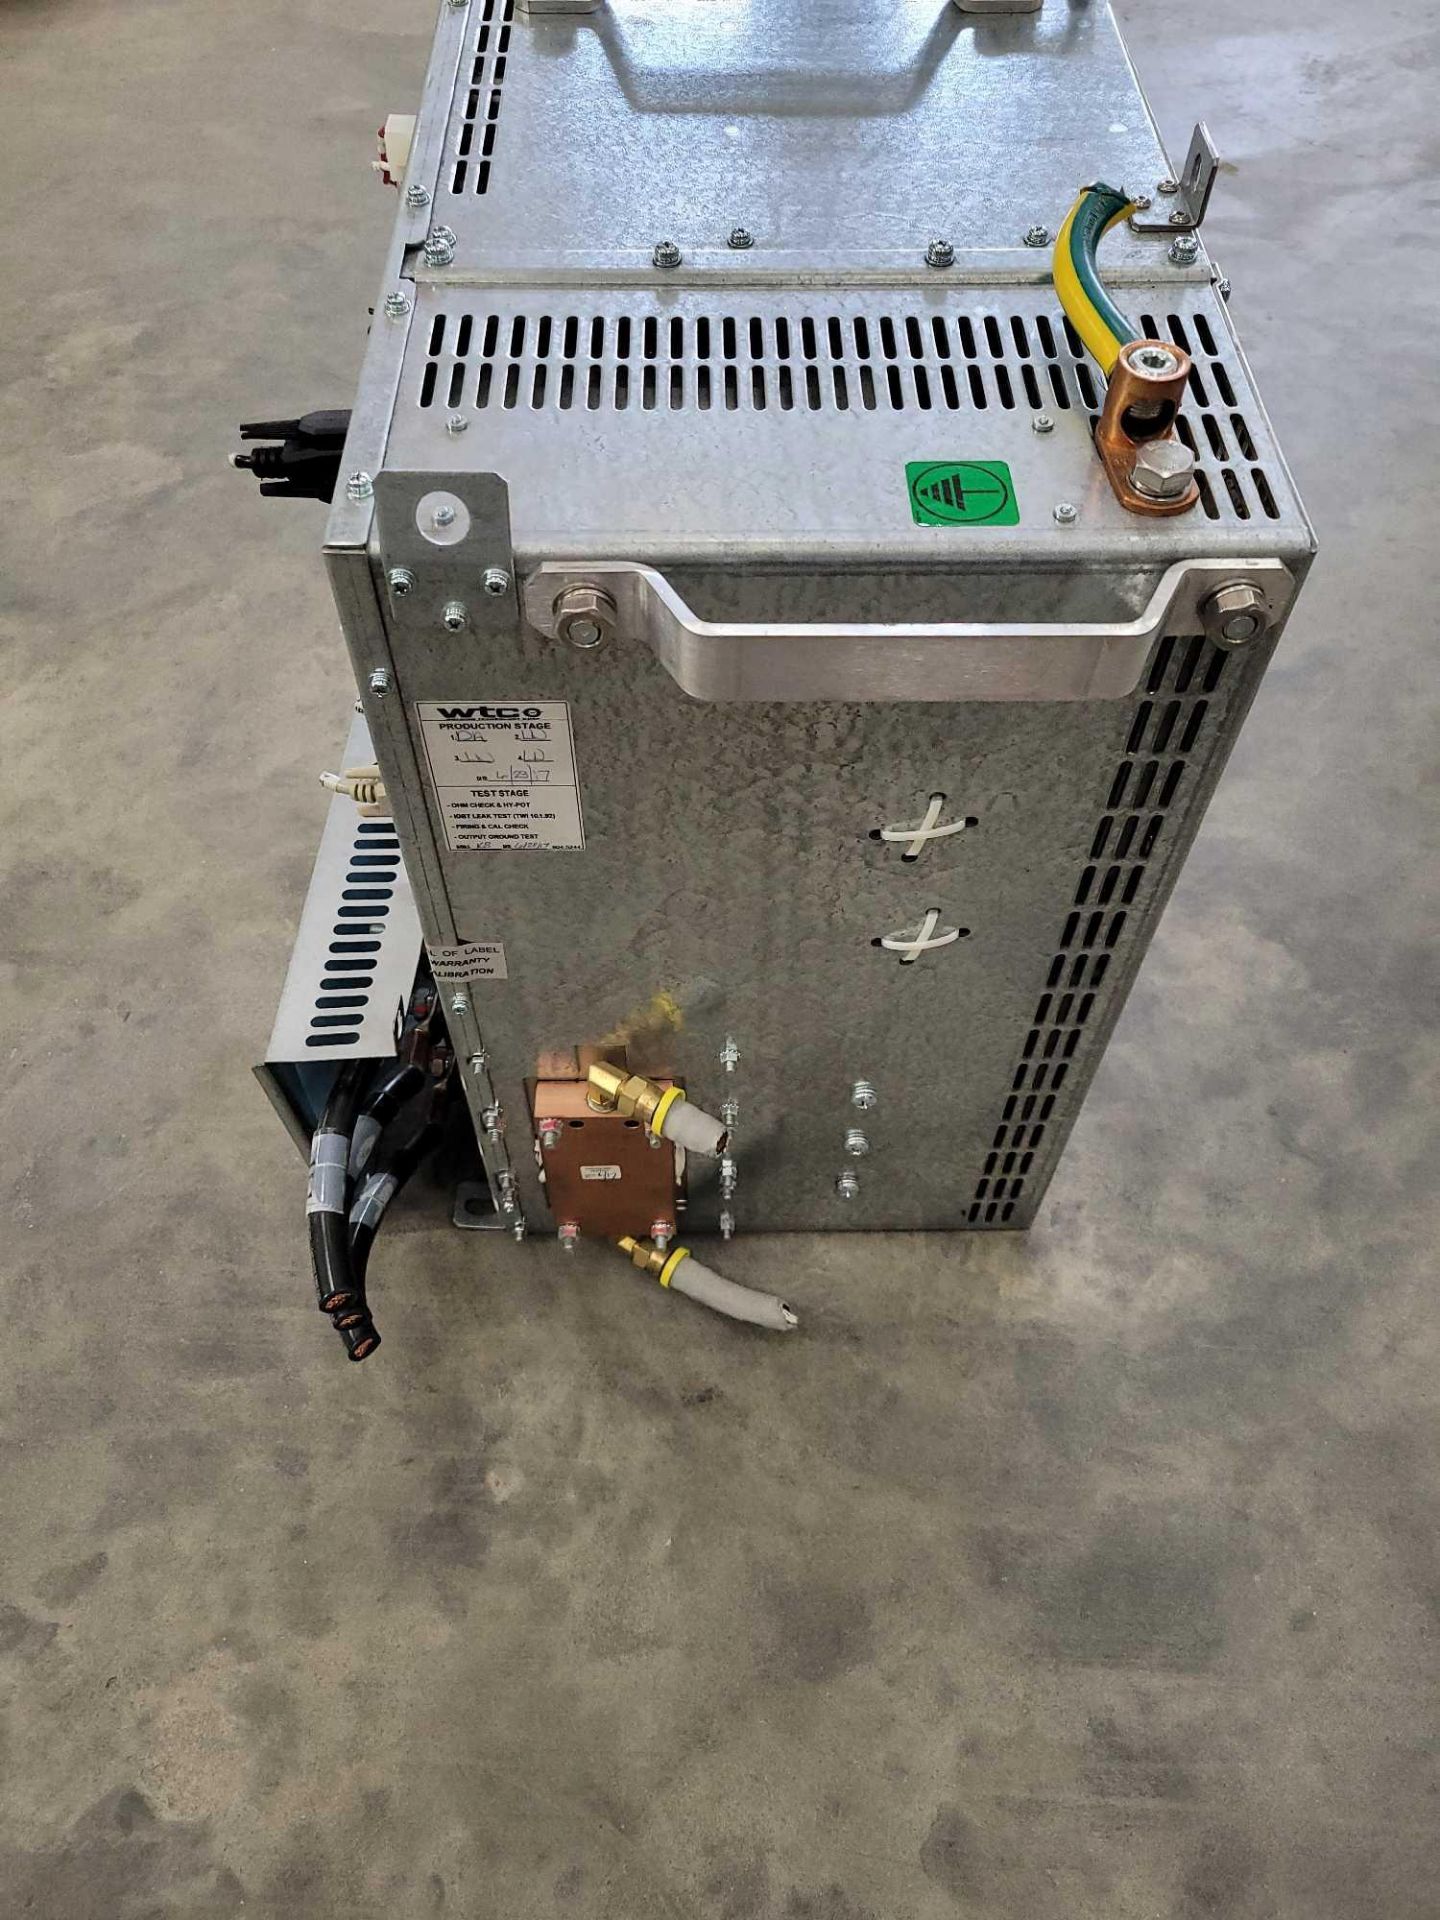 WTC 902-1200VR / Gen 6 MFDC Inverter  /  Lot Weight: 105 lbs - Image 3 of 6